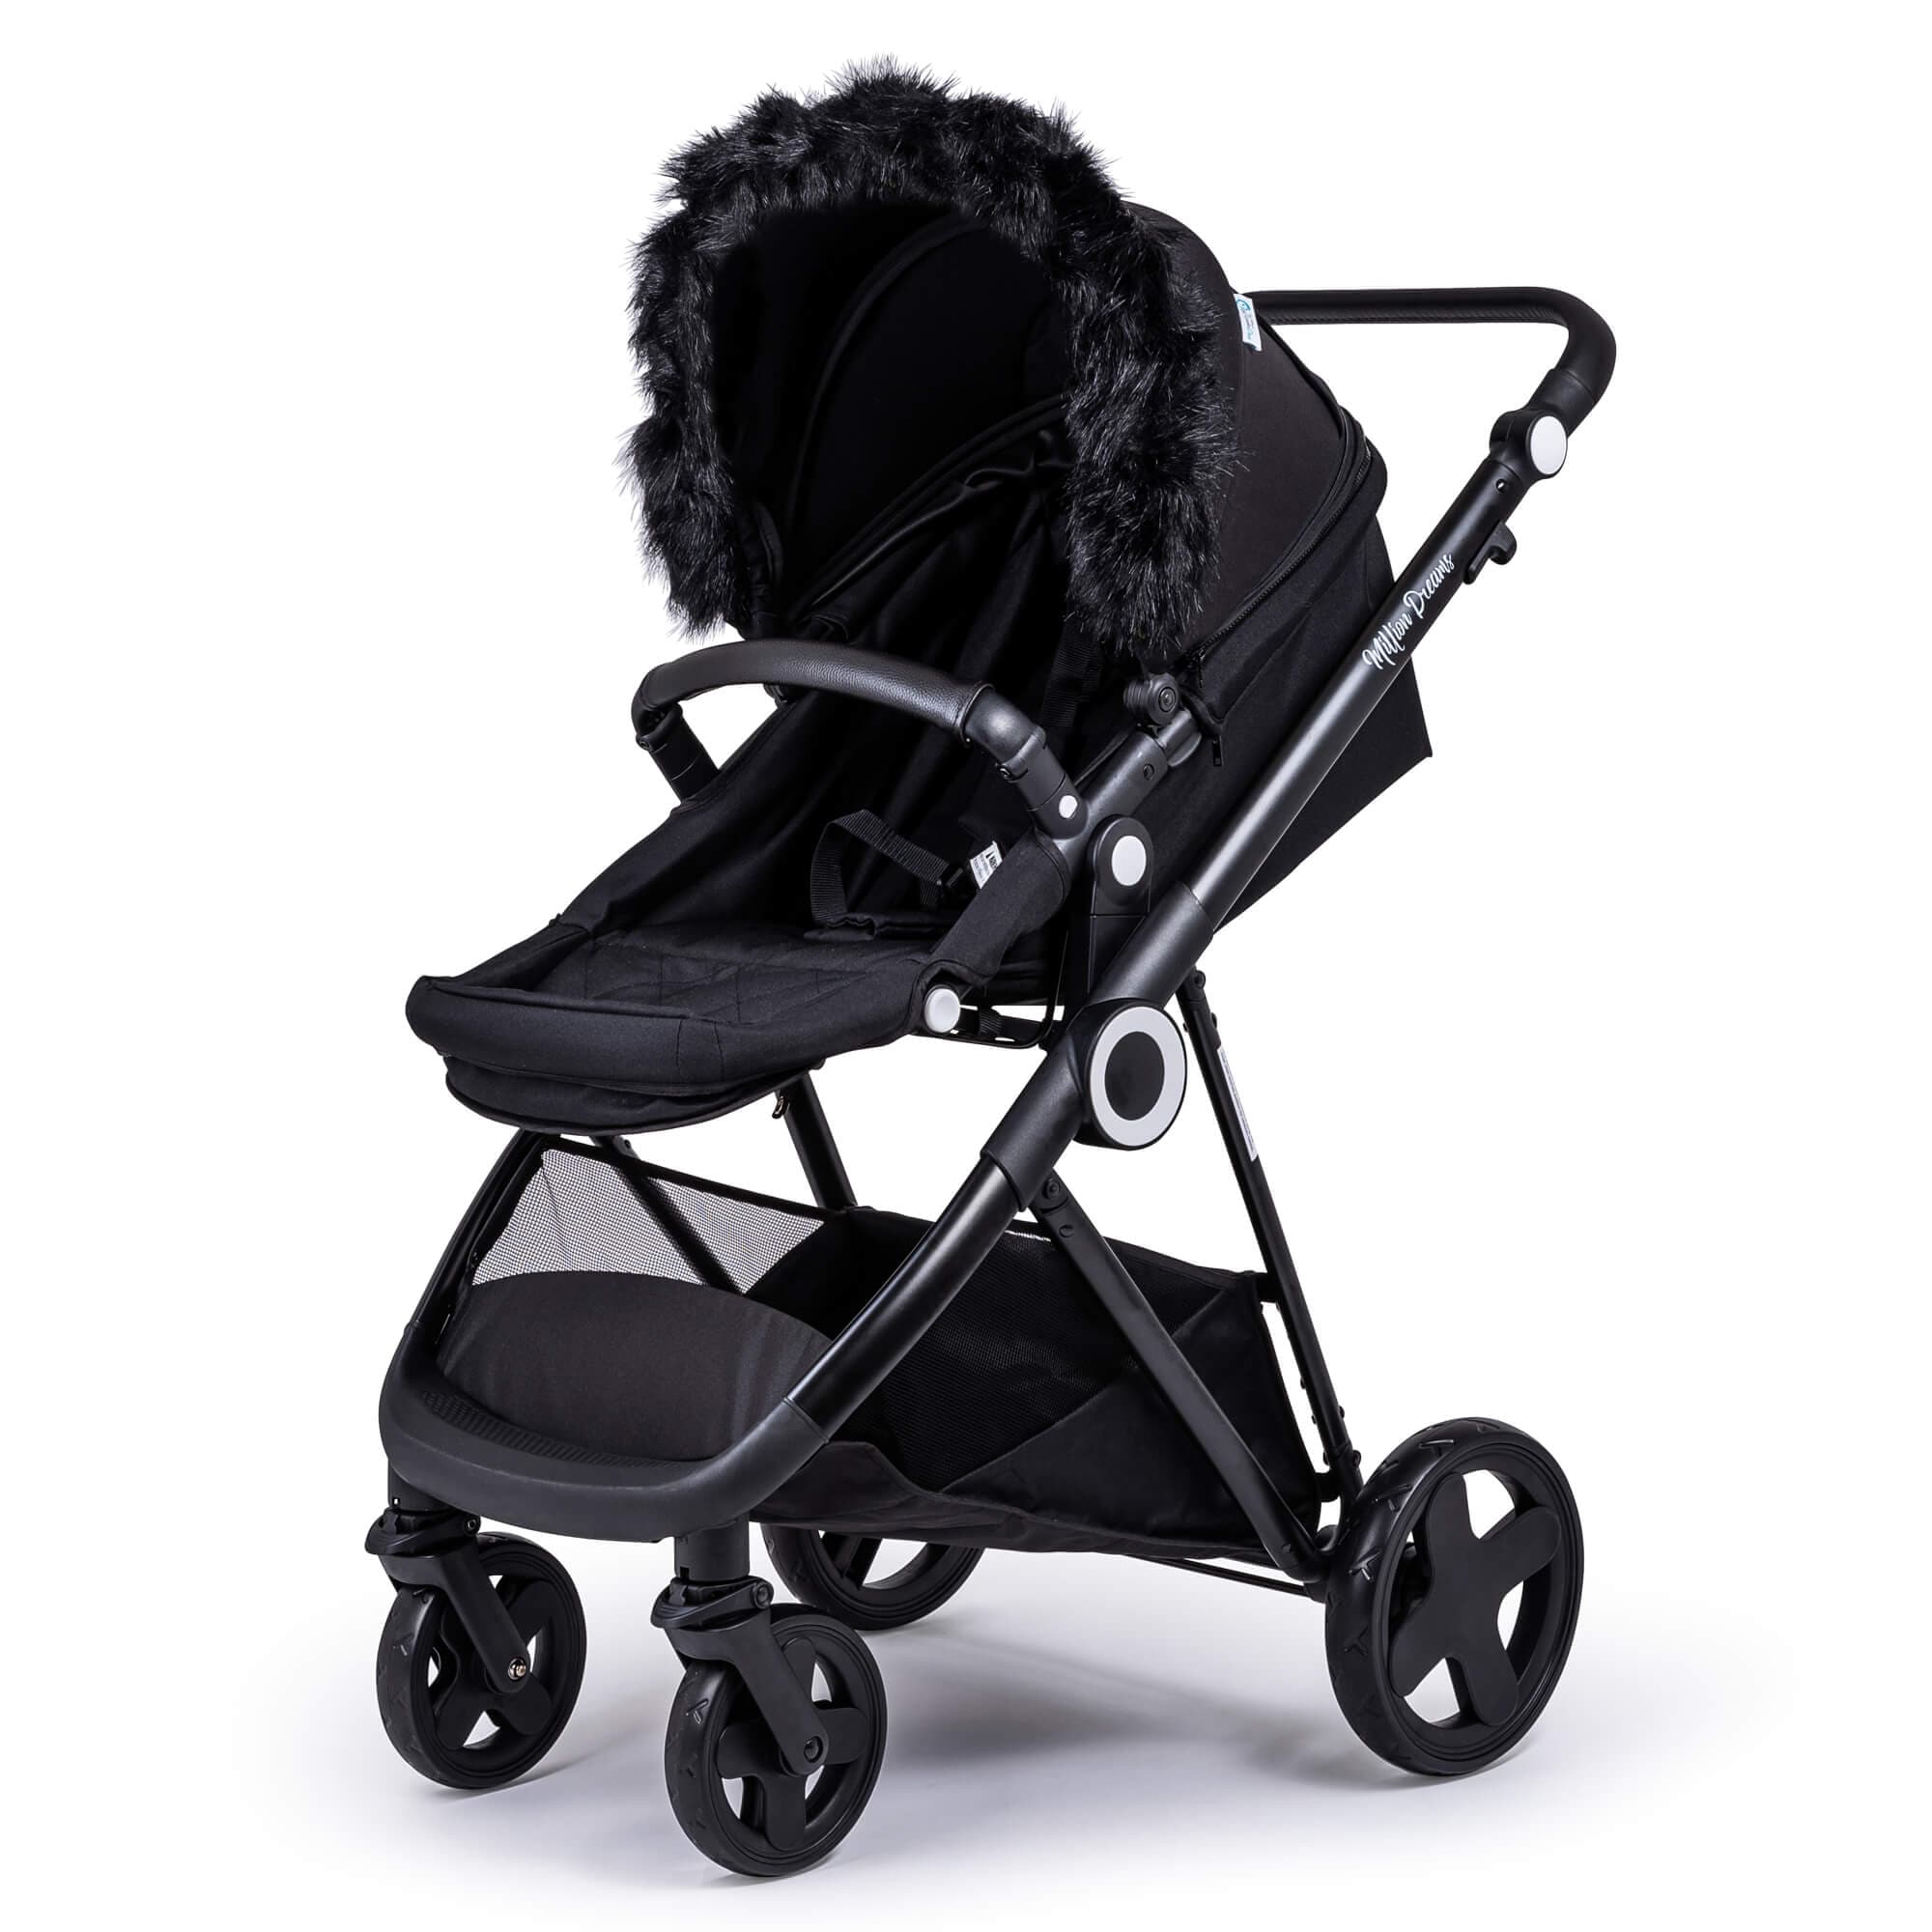 Pram Fur Hood Trim Attachment for Pushchair Compatible with Out 'n' About - For Your Little One